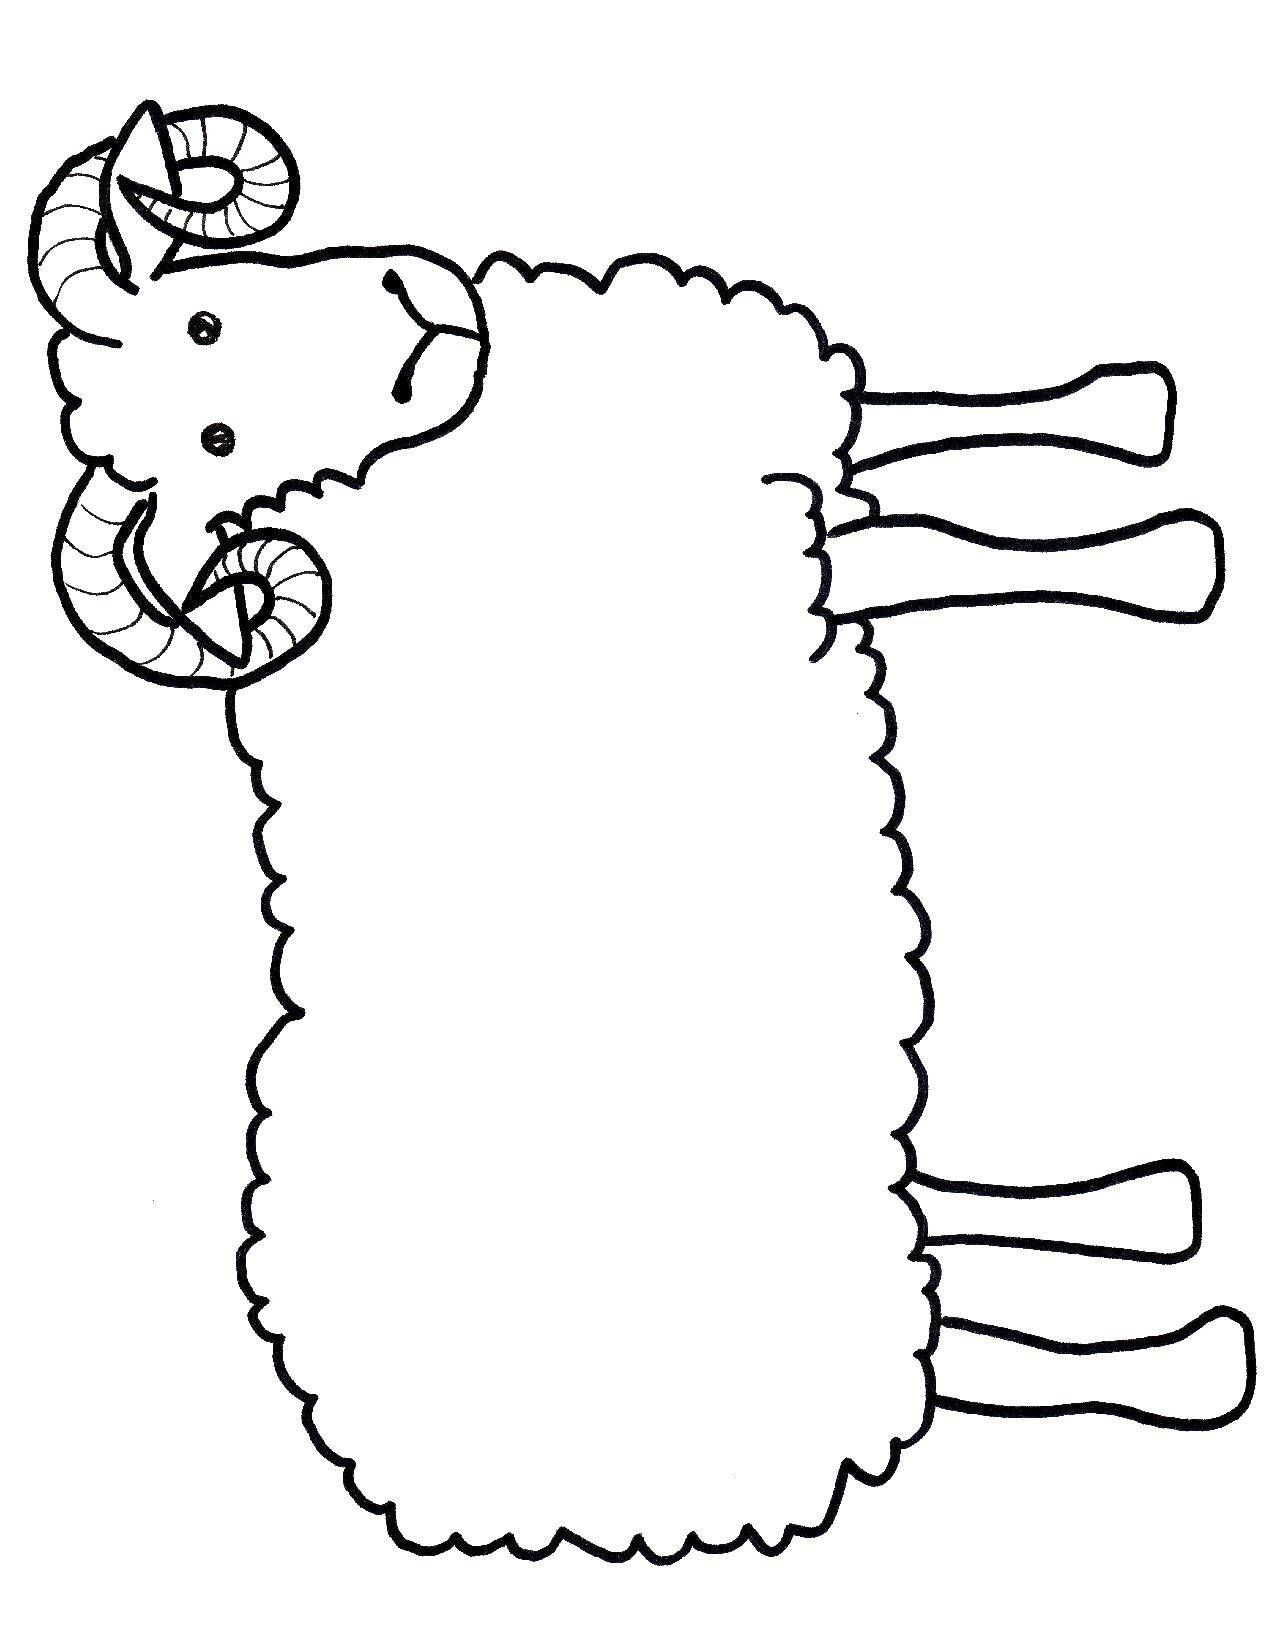 Coloring Horned sheep. Category Animals. Tags:  Animals, sheep.